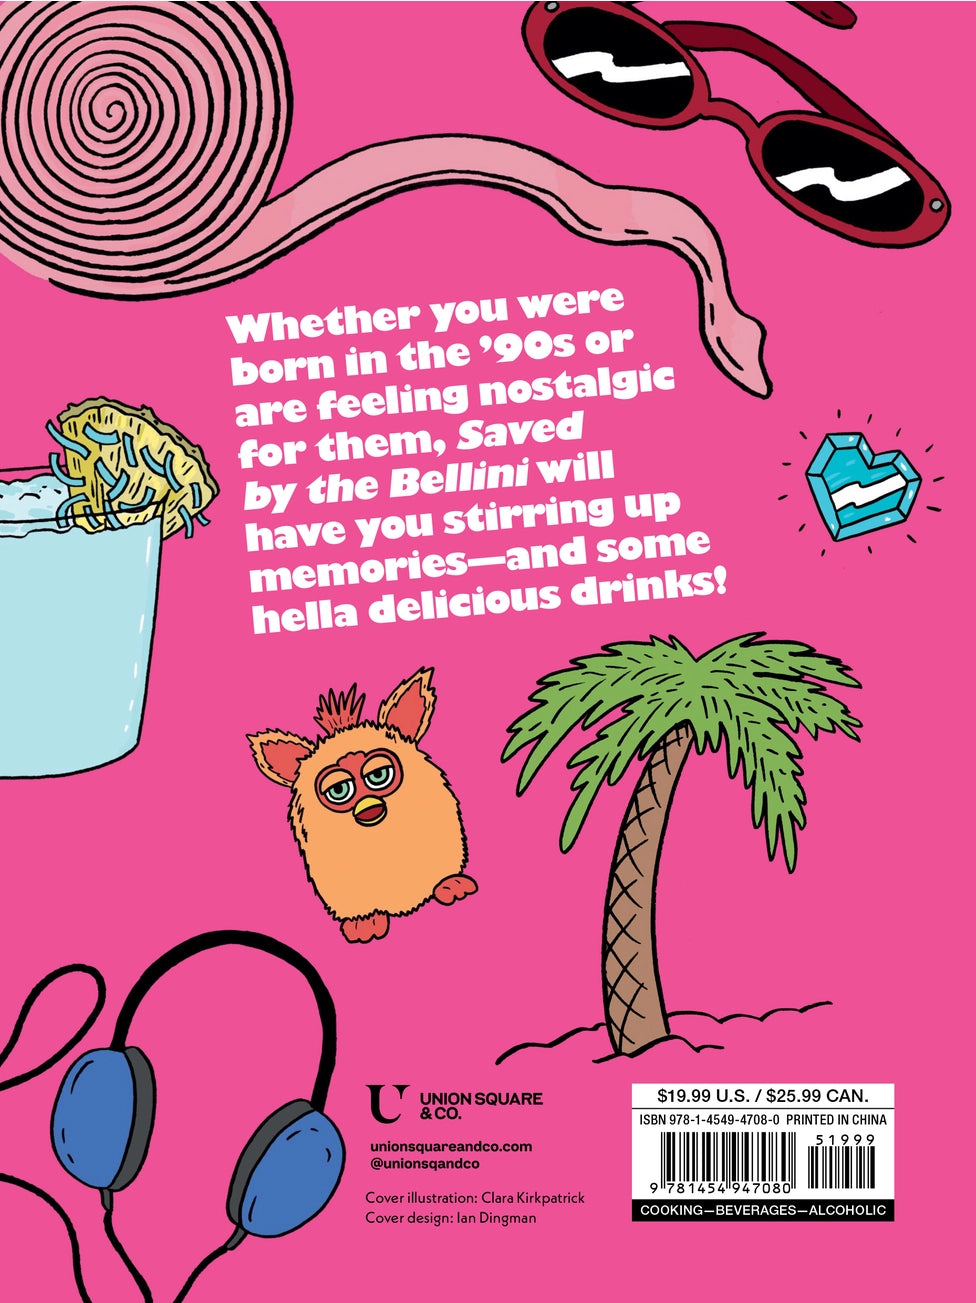 Saved By the Bellini: & Other 90s-Inspired Cocktails Book